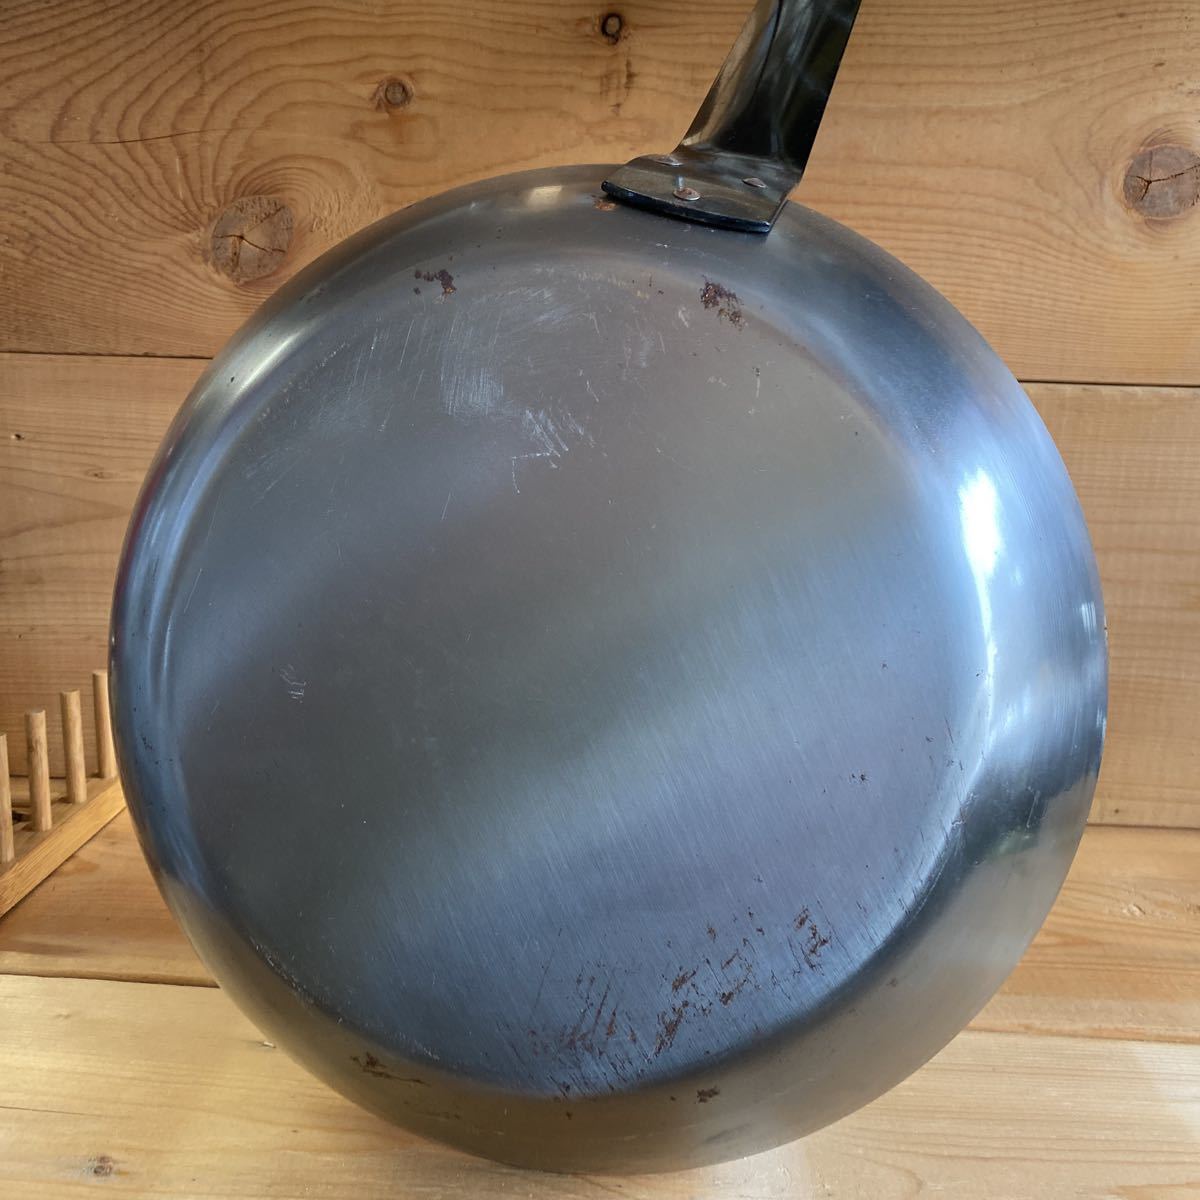  iron fry pan She's person g shining iron strike genuine article 32cm unused Pro use this only special price next times price return 